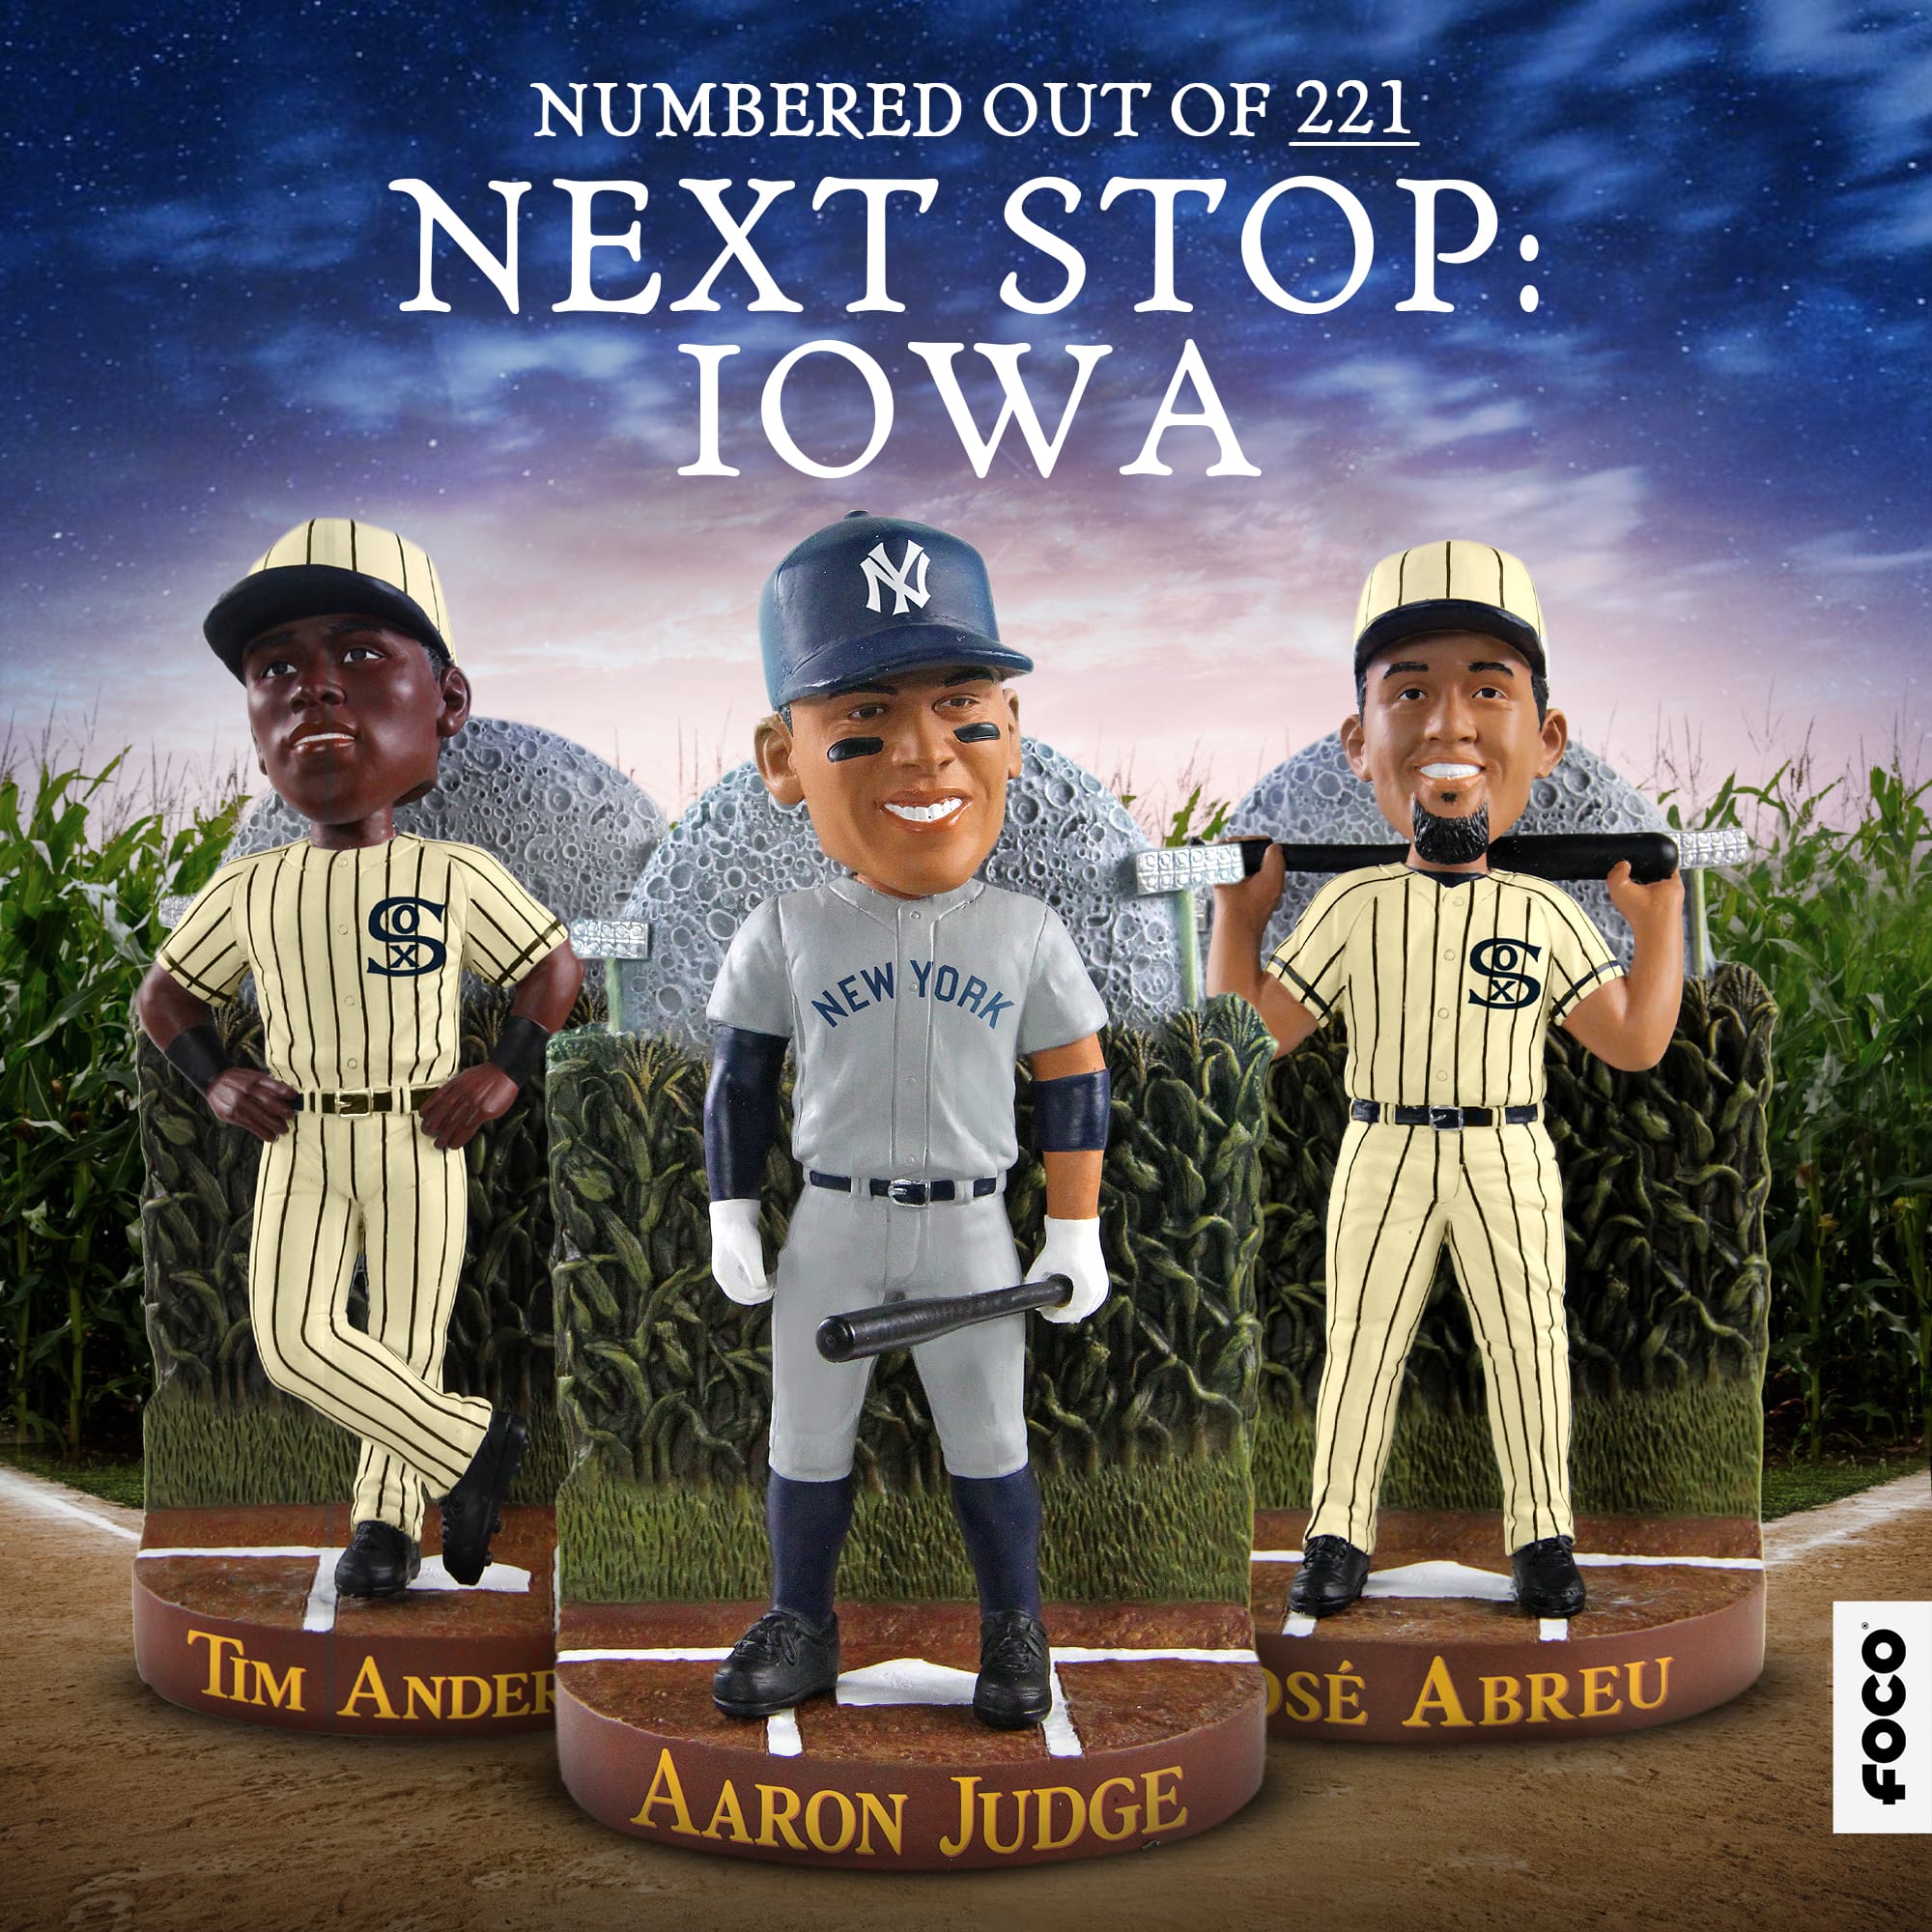 Chicago White Sox fans need these Field of Dreams bobbleheads